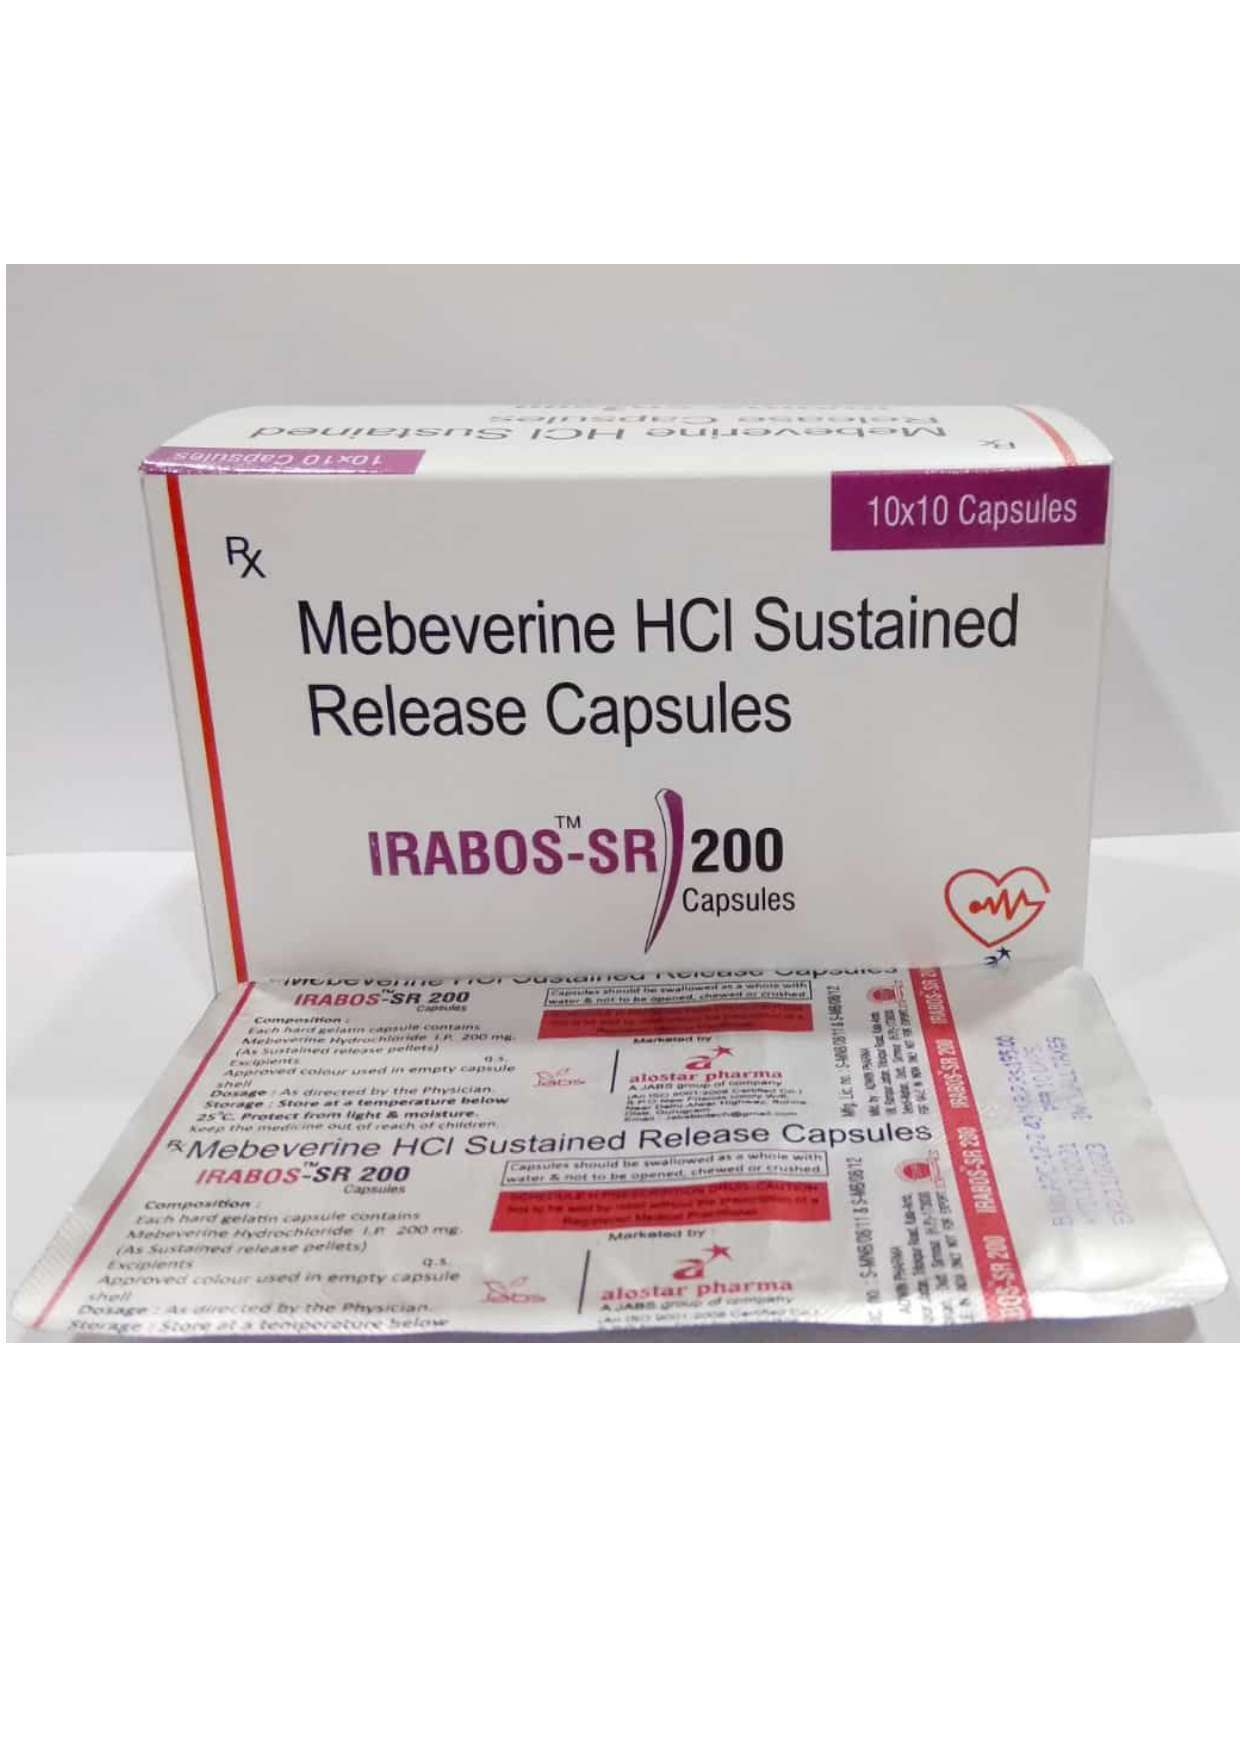 mebeverine hcl sustained release capsules